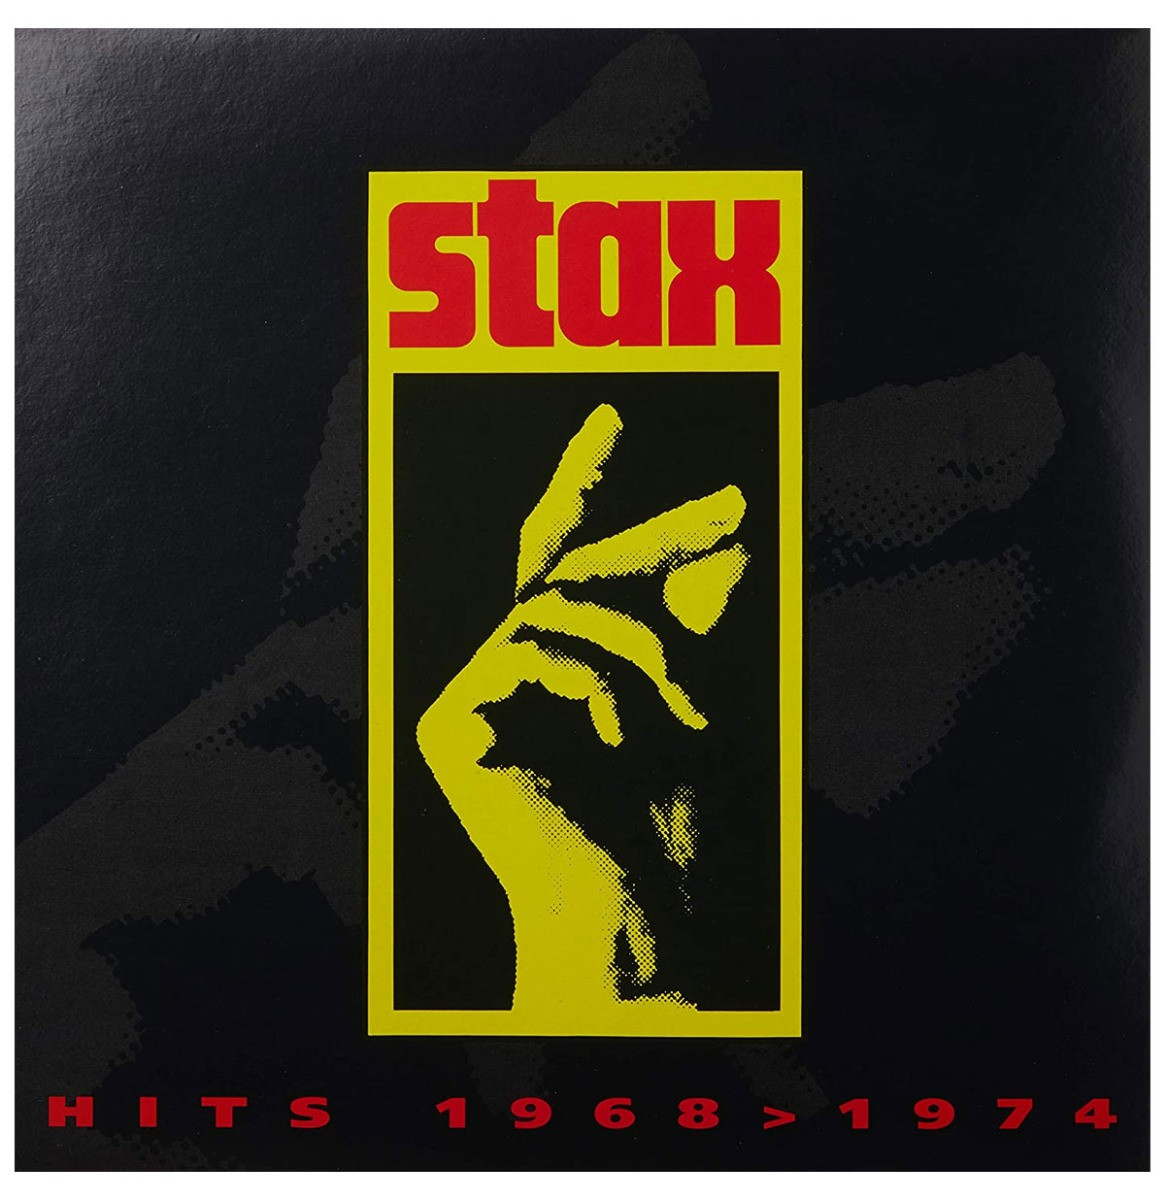 Various Artists - Stax Gold Hits 1968 - 1975 LP